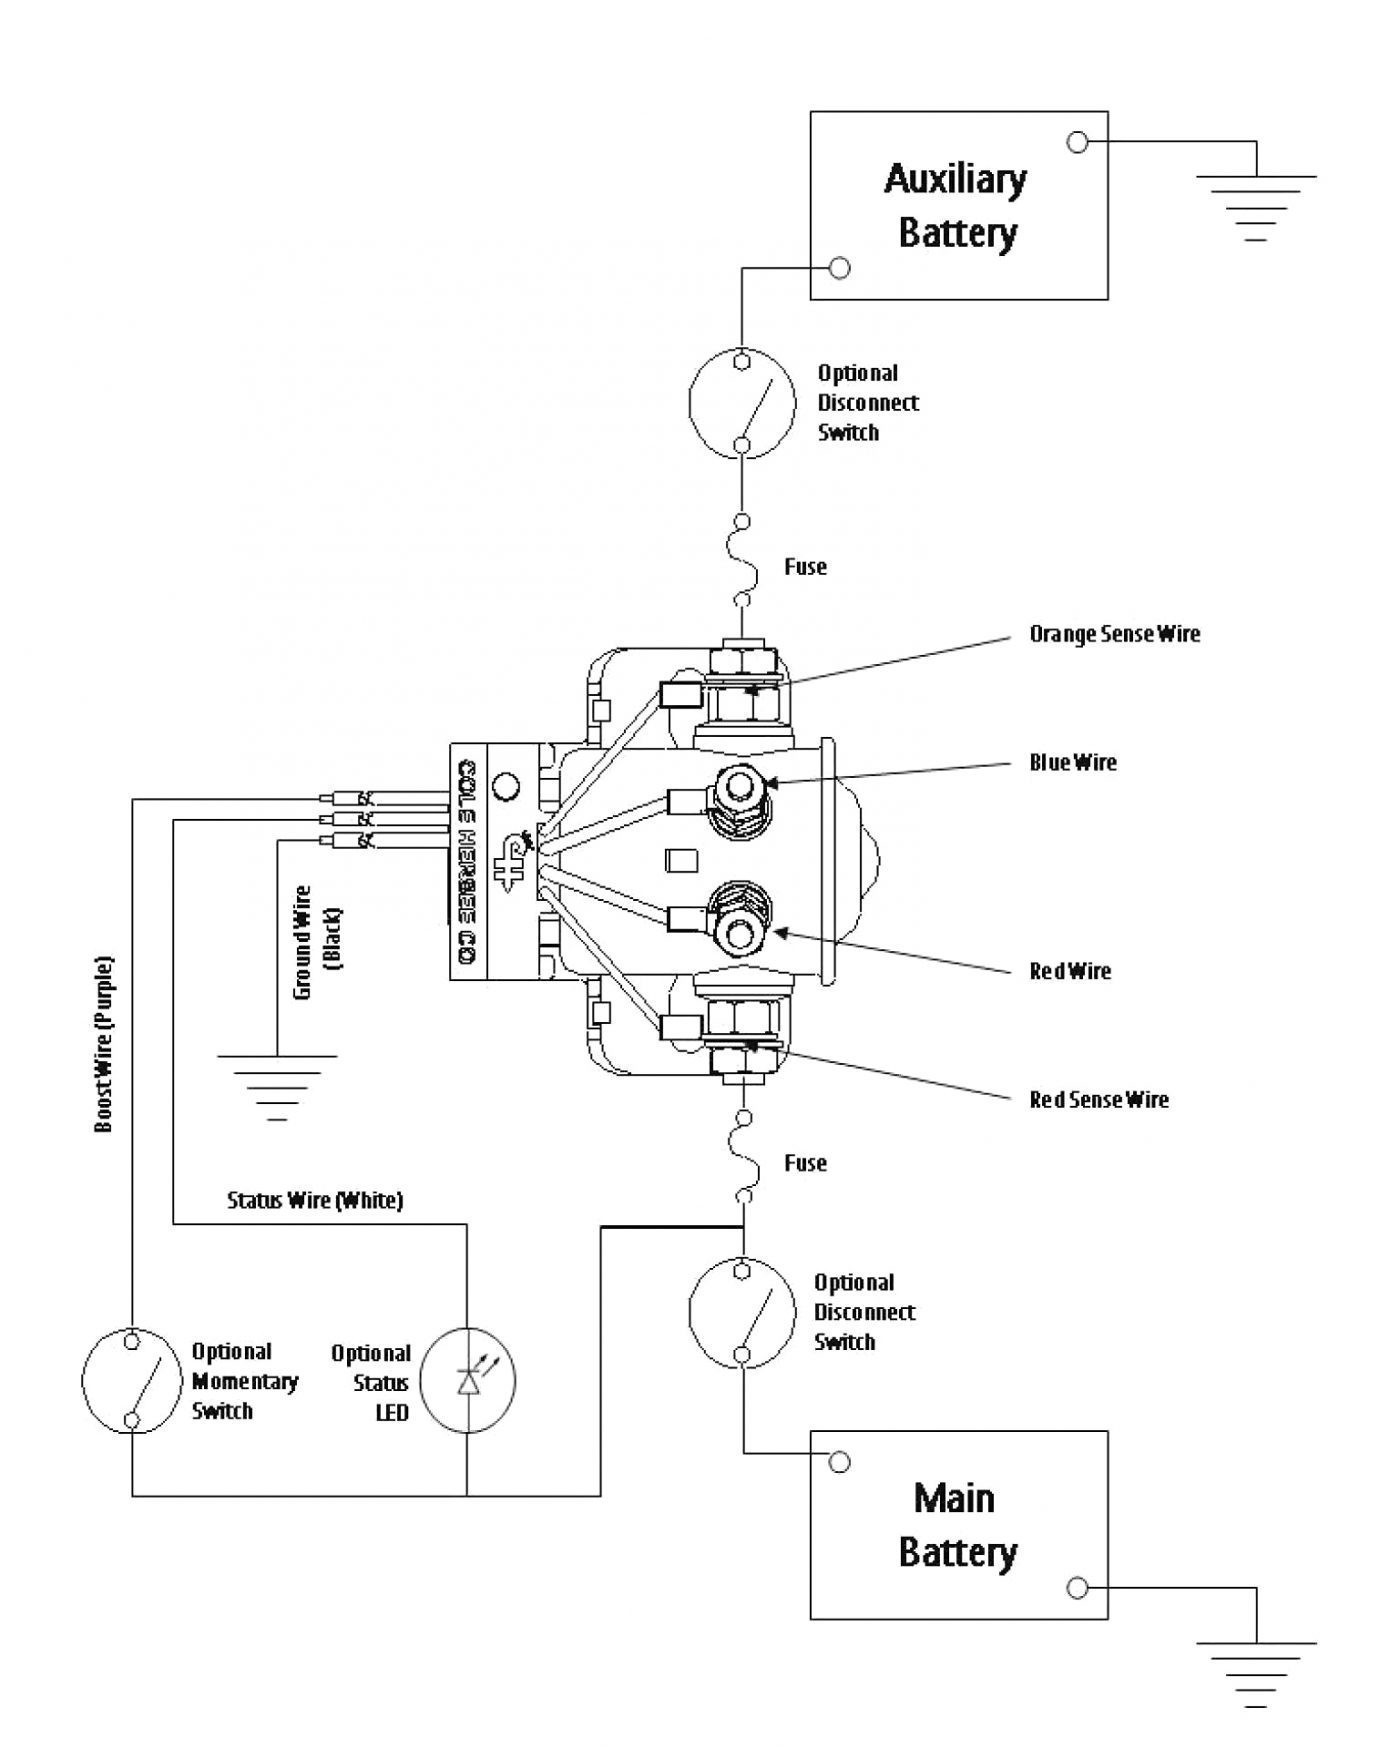 Pressure Switch for Well Pump Wiring Diagram Shurflo Rv Water Pump Wiring Diagram Unique Wiring Diagram Water Of Pressure Switch for Well Pump Wiring Diagram